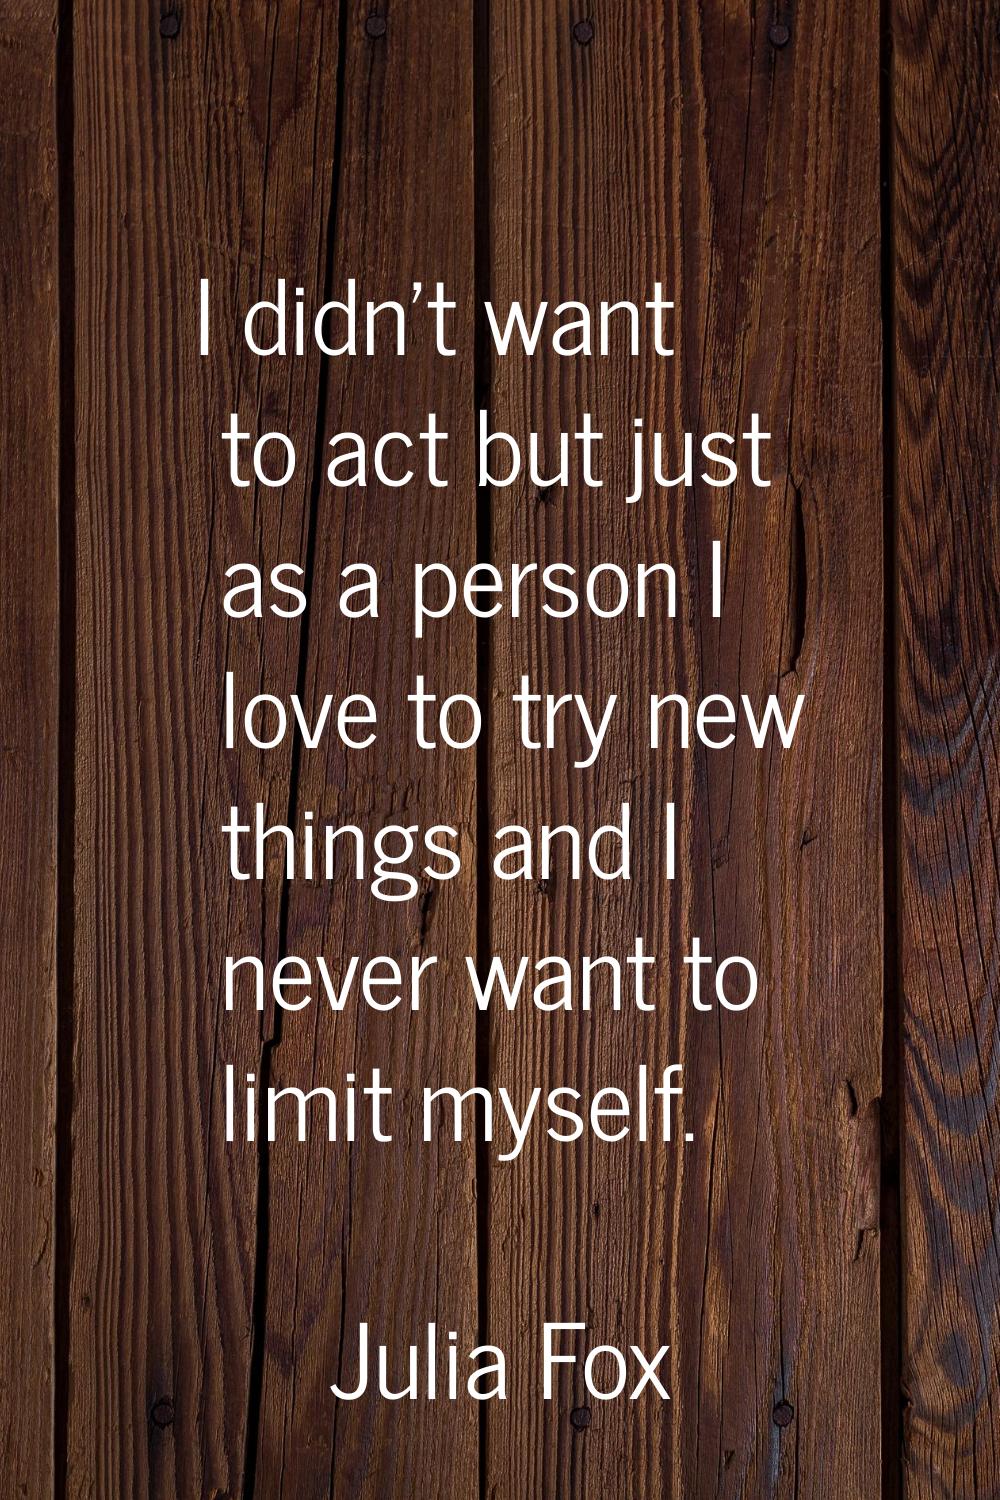 I didn't want to act but just as a person I love to try new things and I never want to limit myself